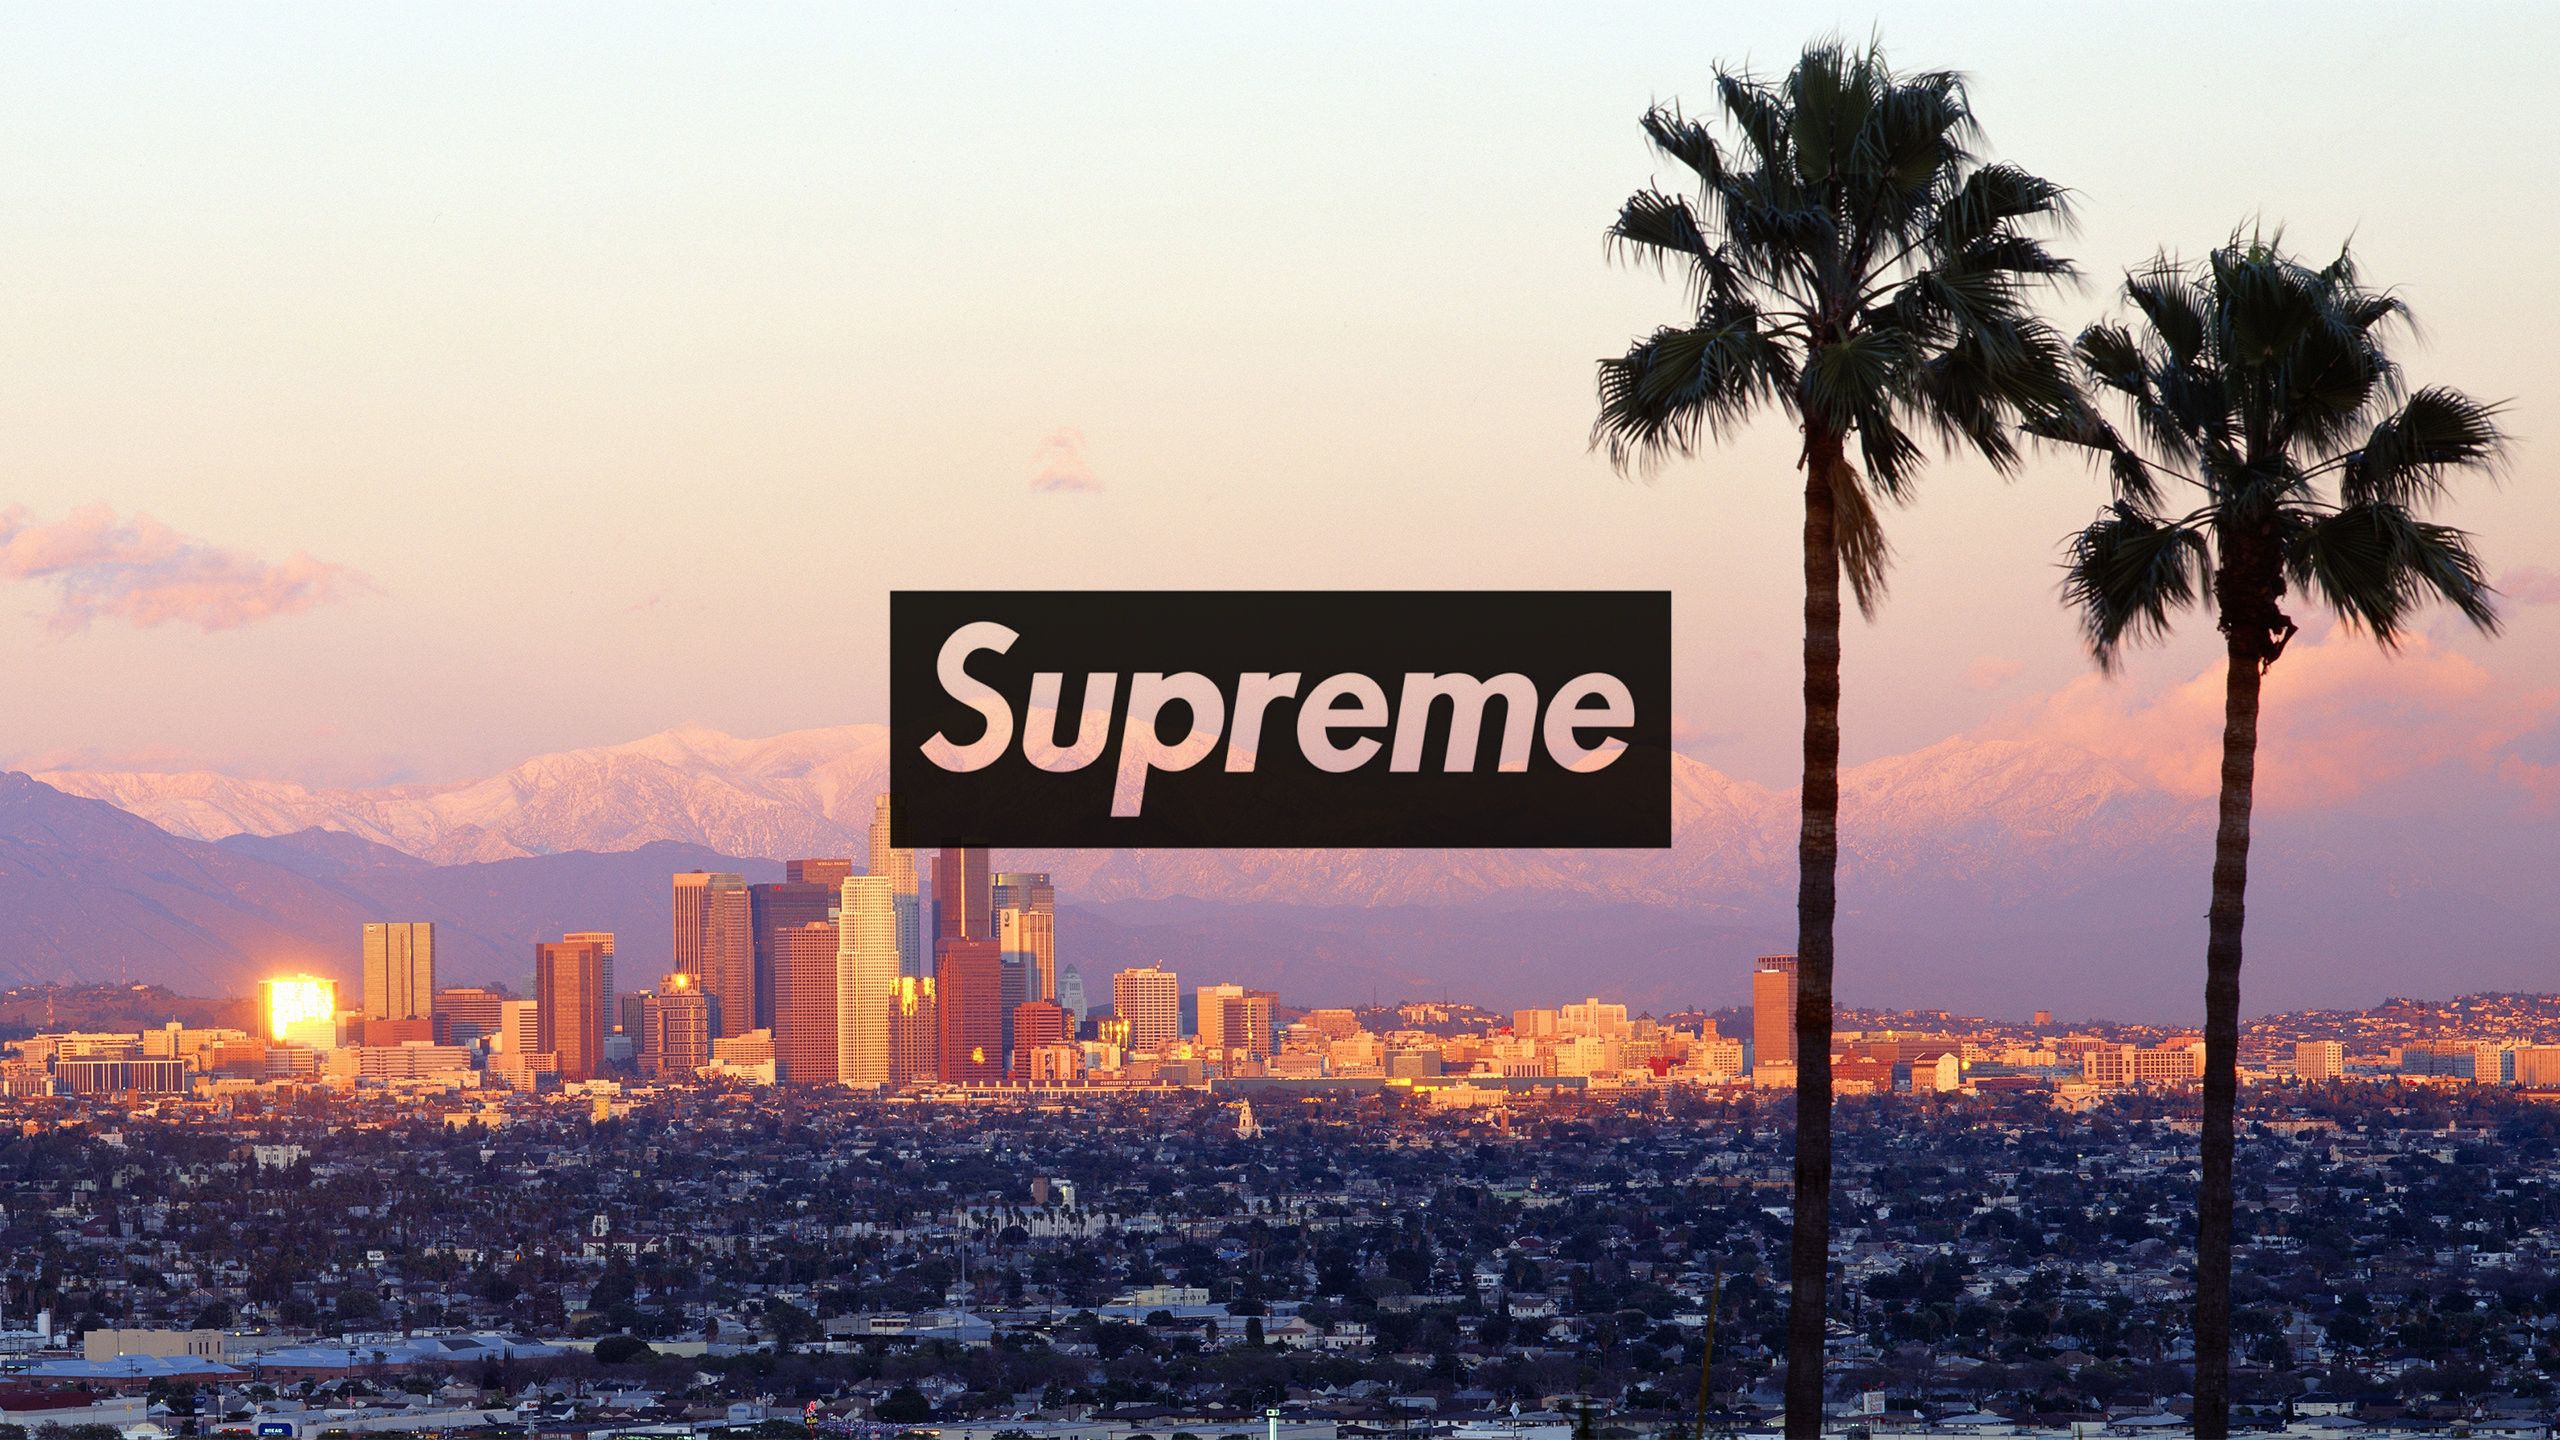 The Los Angeles Supreme Wallpaper Below For